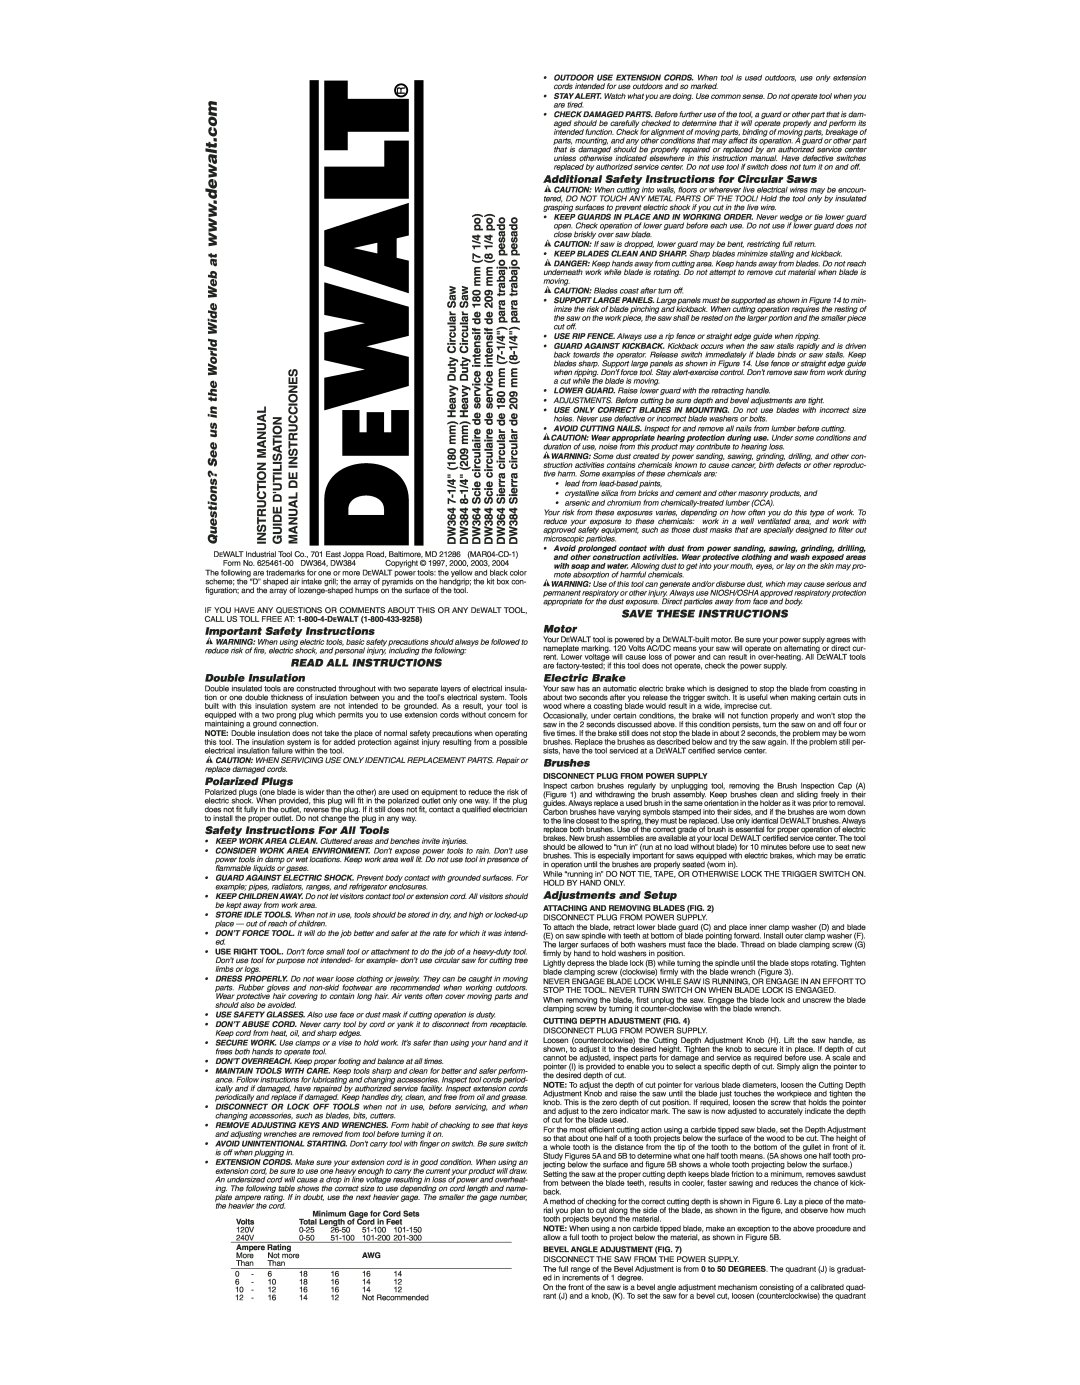 DeWalt DW364 instruction manual Definitions Safety Guidelines, General Safety Rules, Save These Instructions, Motor 